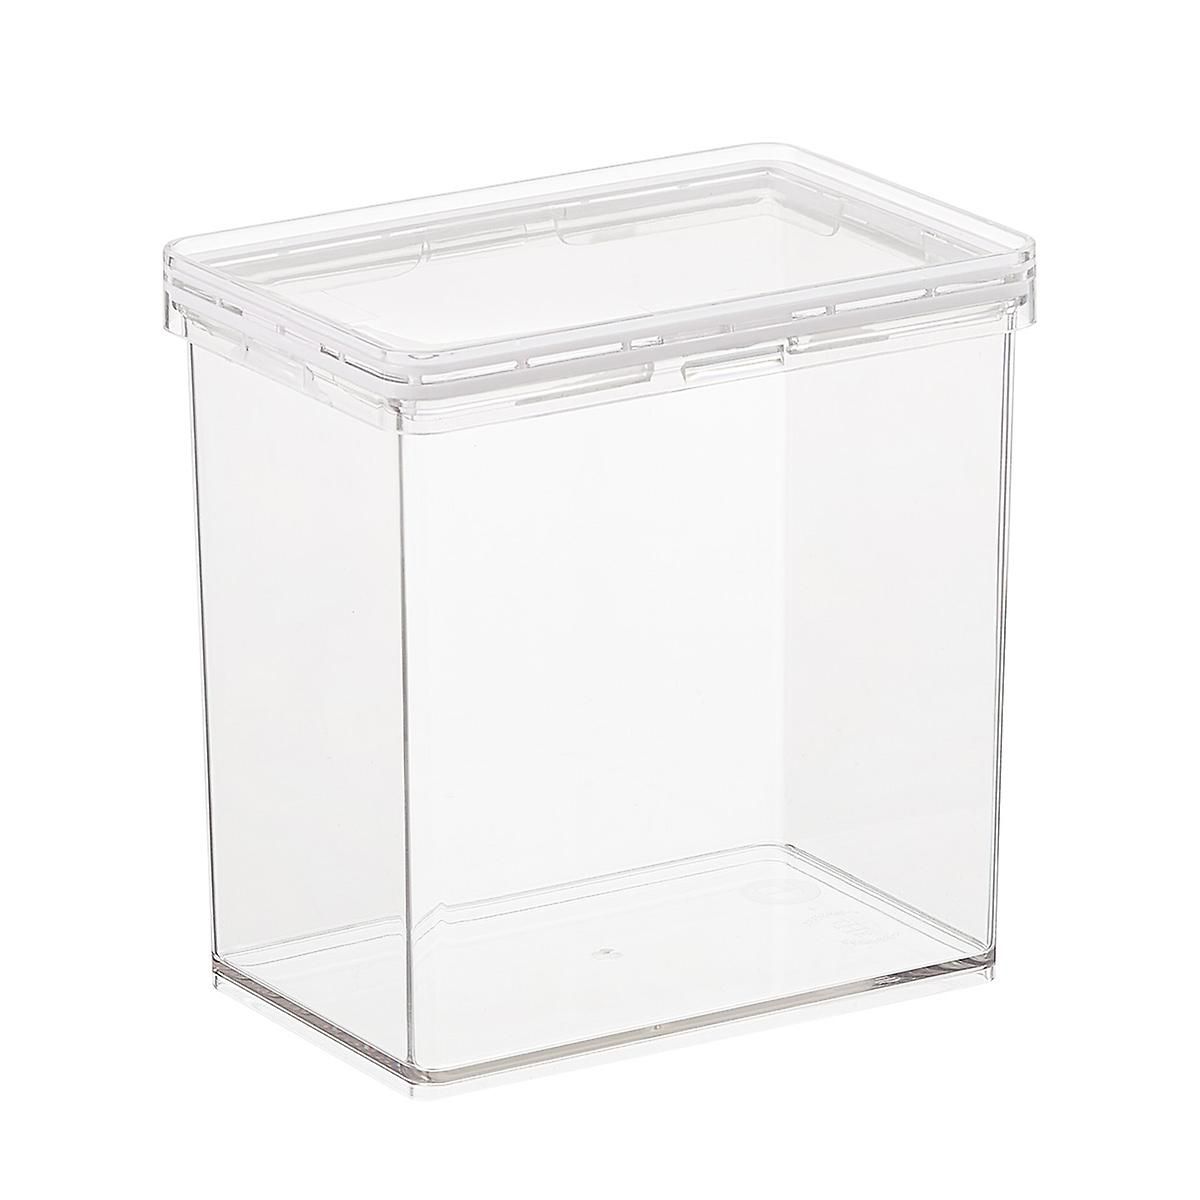 T.H.E. Medium Canister 1.5 qt. | The Container Store